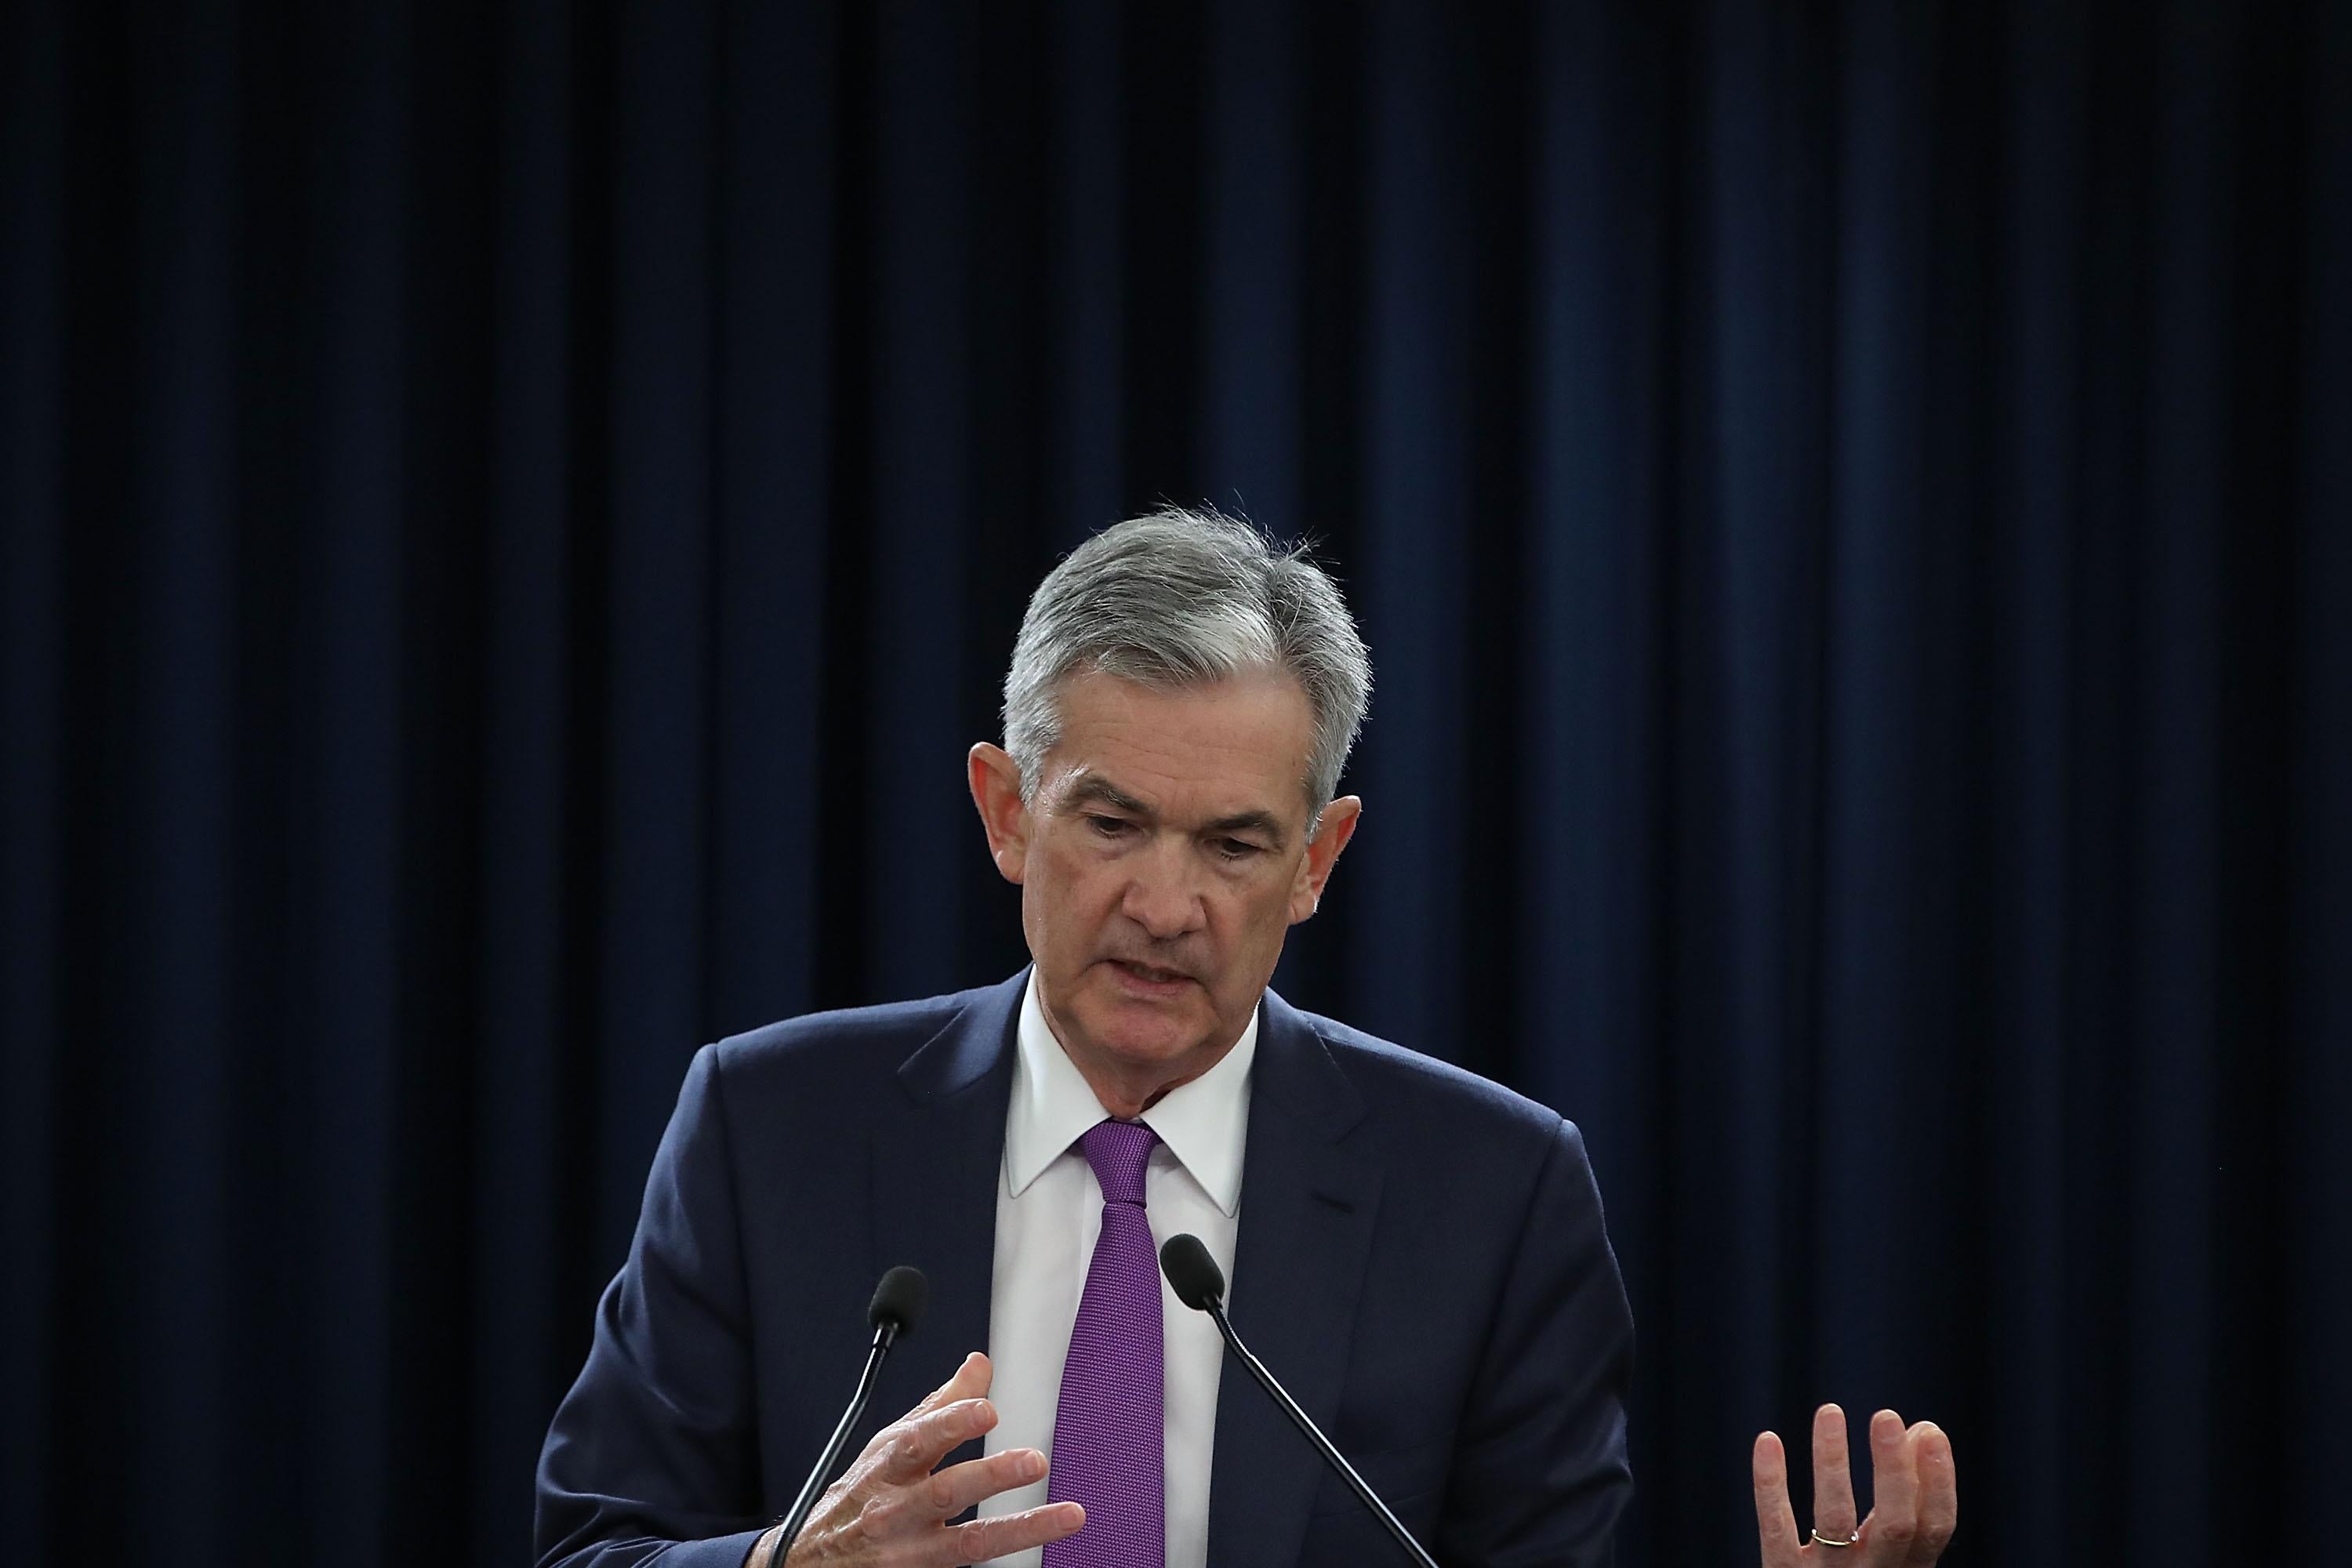 WASHINGTON, DC - SEPTEMBER 26:  Federal Reserve Board Chairman Jerome Powell speaks during a news conference on September 26, 2018 in Washington, DC.  The US Federal Reserve raised the short-term interest rates by a quarter percentage point on Wednesday, the third increase of the year, and signaled two more hikes were coming in 2018 and four in 2019.  (Photo by Mark Wilson/Getty Images)